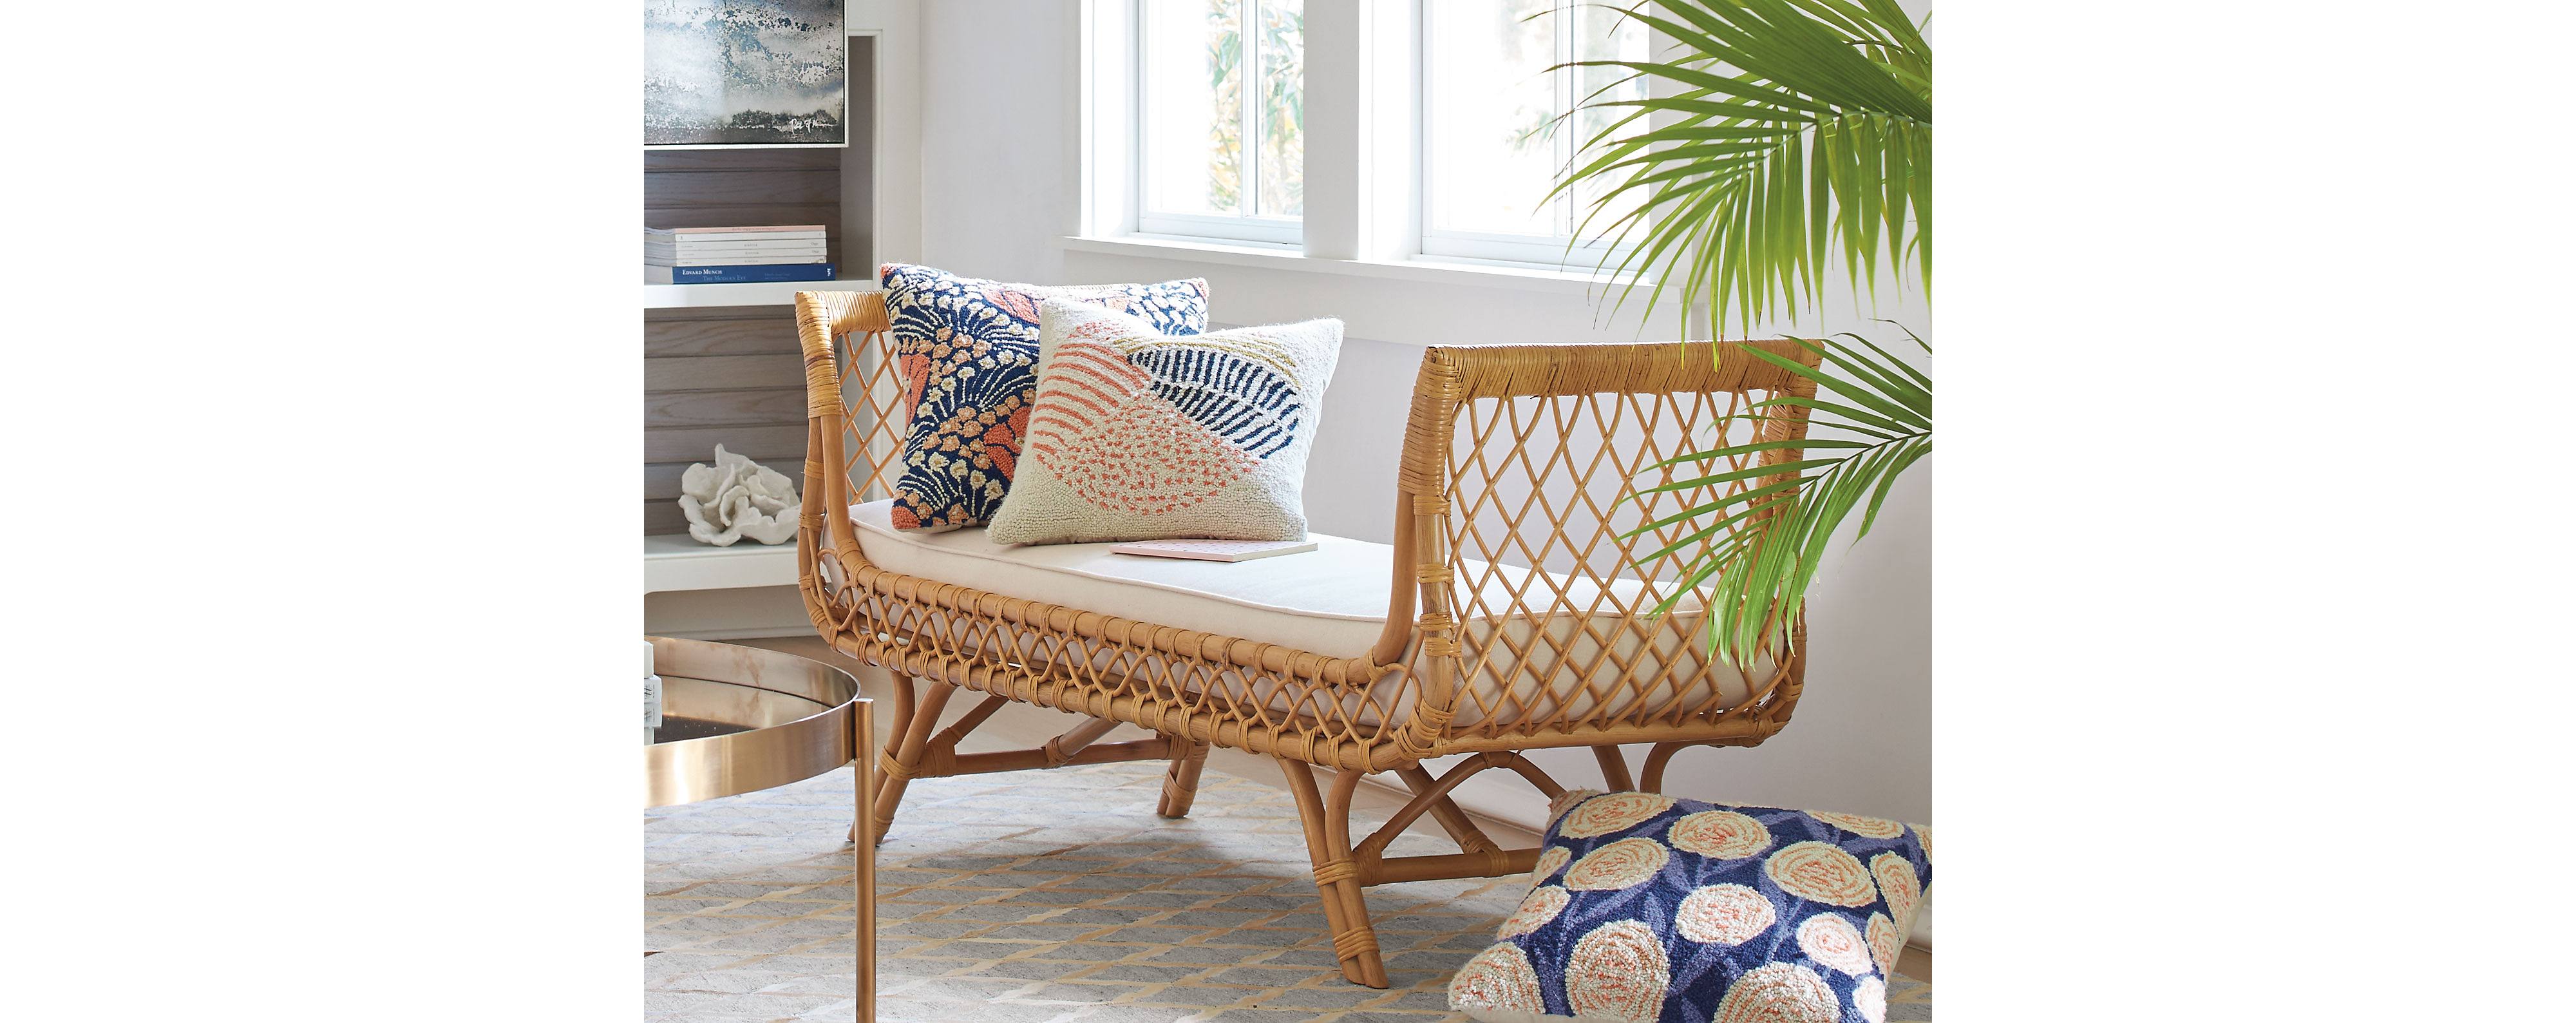 living room design with rattan furniture